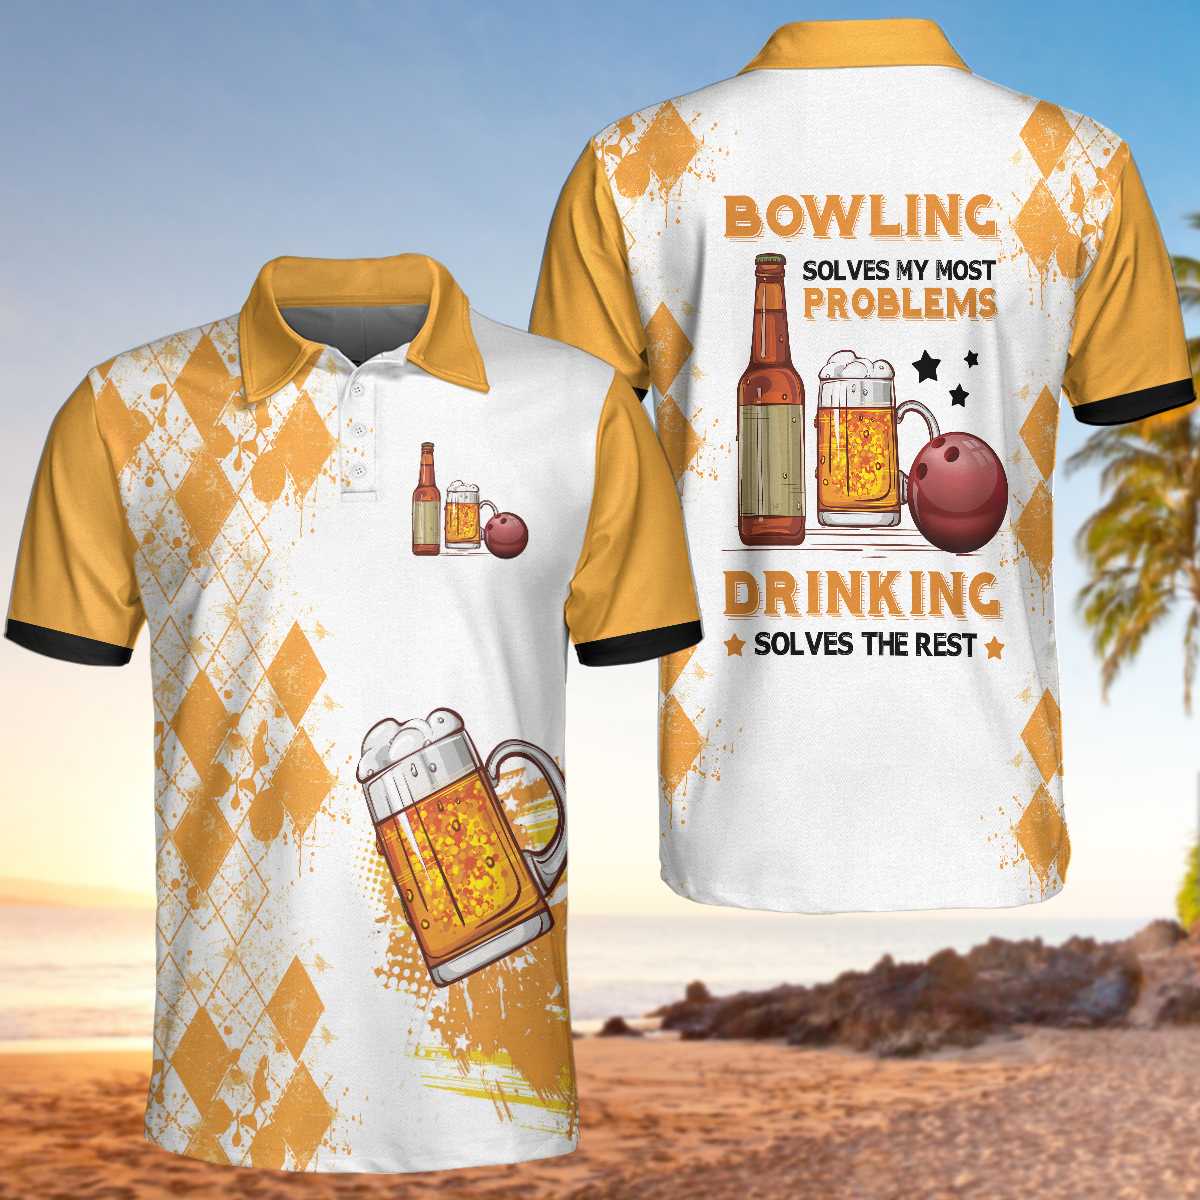 Bowling Men Polo Shirt - Argyle Pattern Beer Polo Shirt, Bowling Shirt For Men - Perfect Gift For Friend, Family, Bowling Lovers